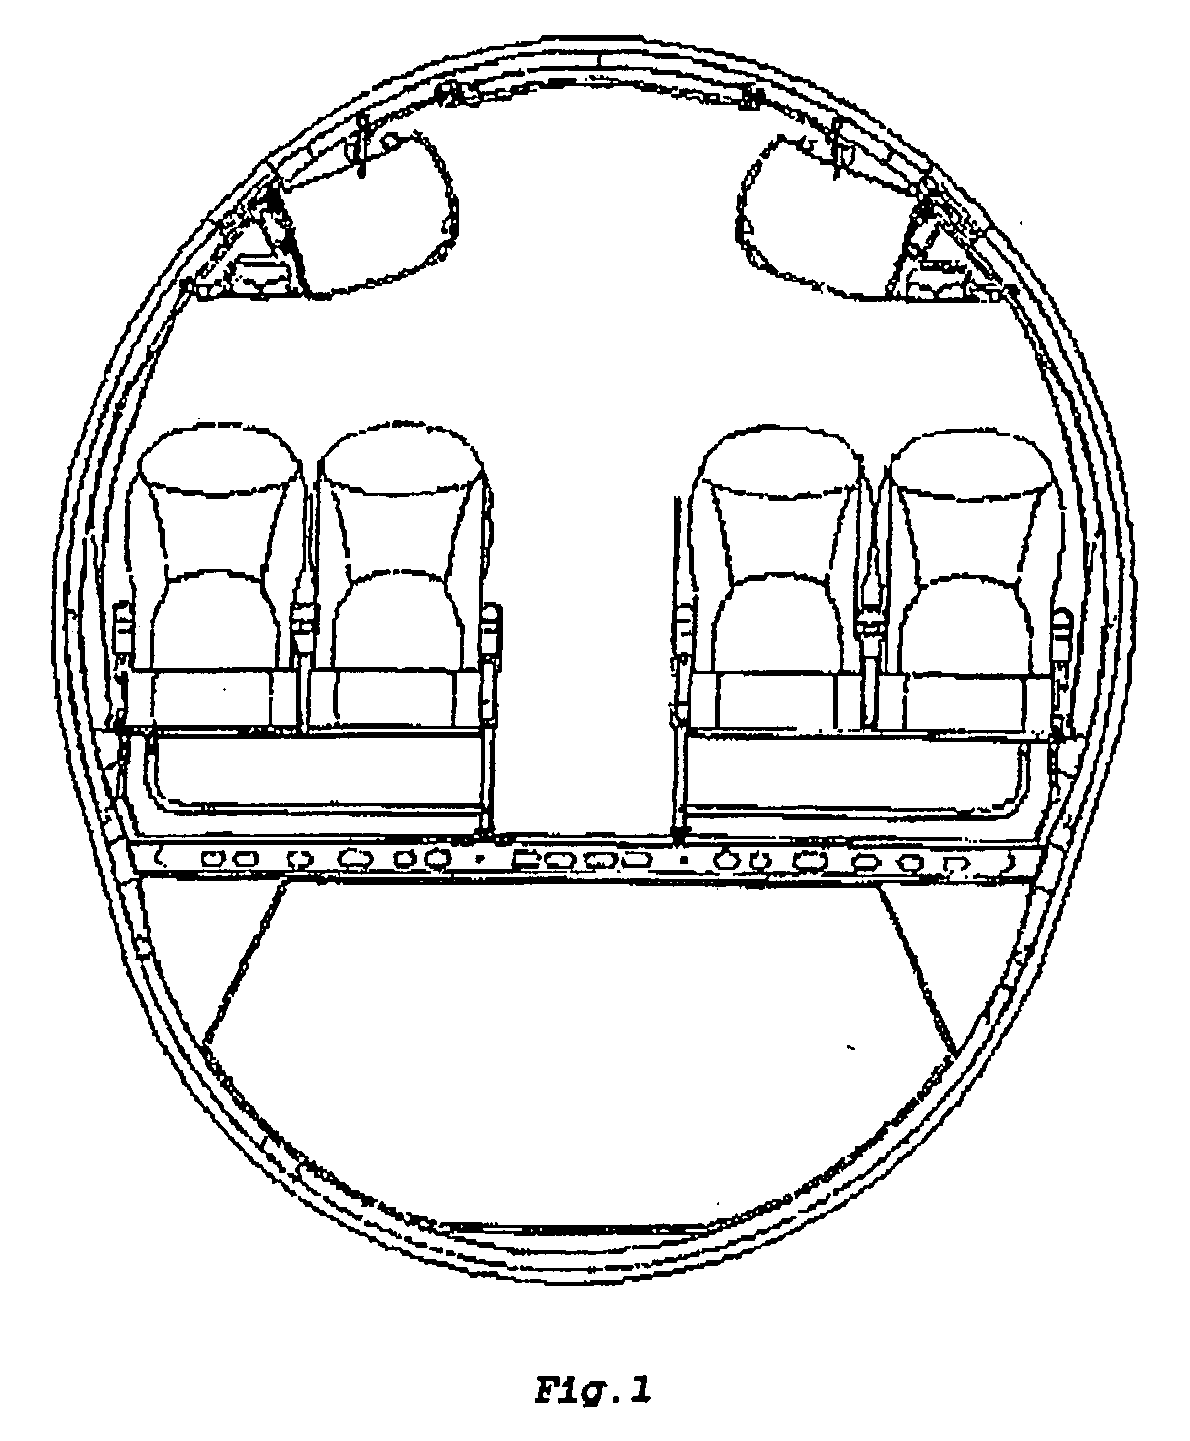 Device for fastening passenger seats on a seat track break in an aircraft